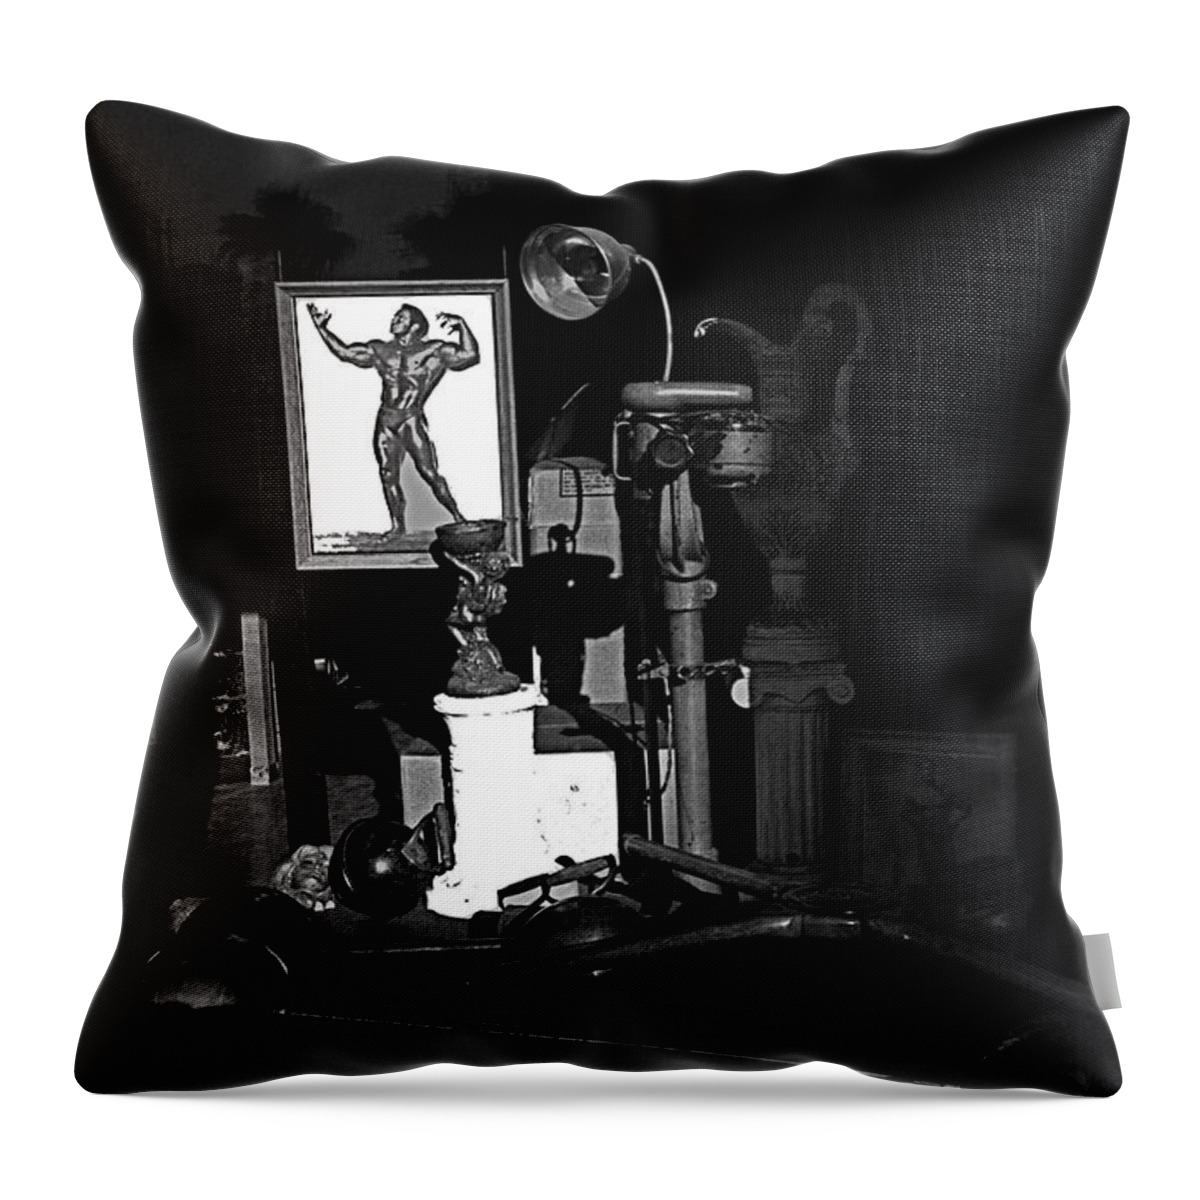  Film Noir Richard Widmark Night And The City 1950 1 Johnny Gibson Health And Gym Equipment Tucson1984 Throw Pillow featuring the photograph Film Noir Richard Widmark Night And The City 1950 1 Johnny Gibson Health And Gym Equipment Tucson #3 by David Lee Guss